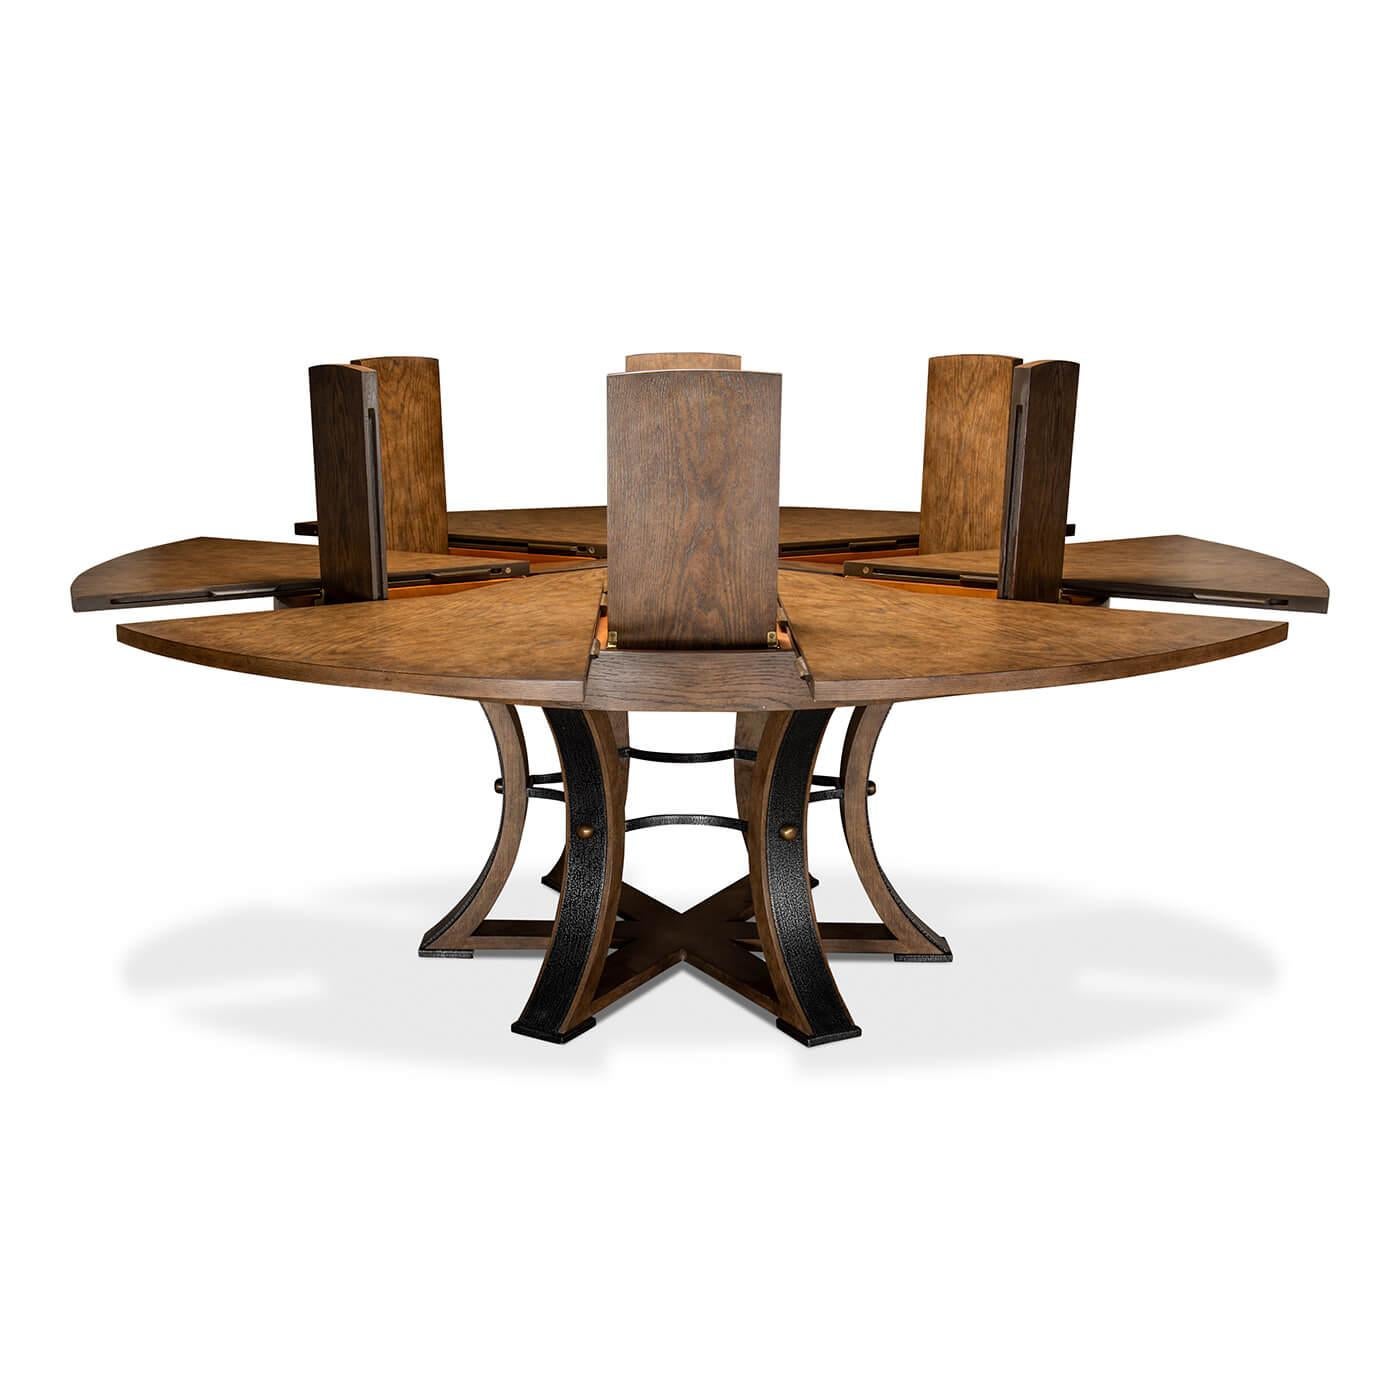 A modern Industrial style round extension dining table with a wire-brushed oak finish top, the round form self-storing leaves on a six-sided pedestal base with hammered iron mounts to each leg.

Measures: Open dimensions: 84